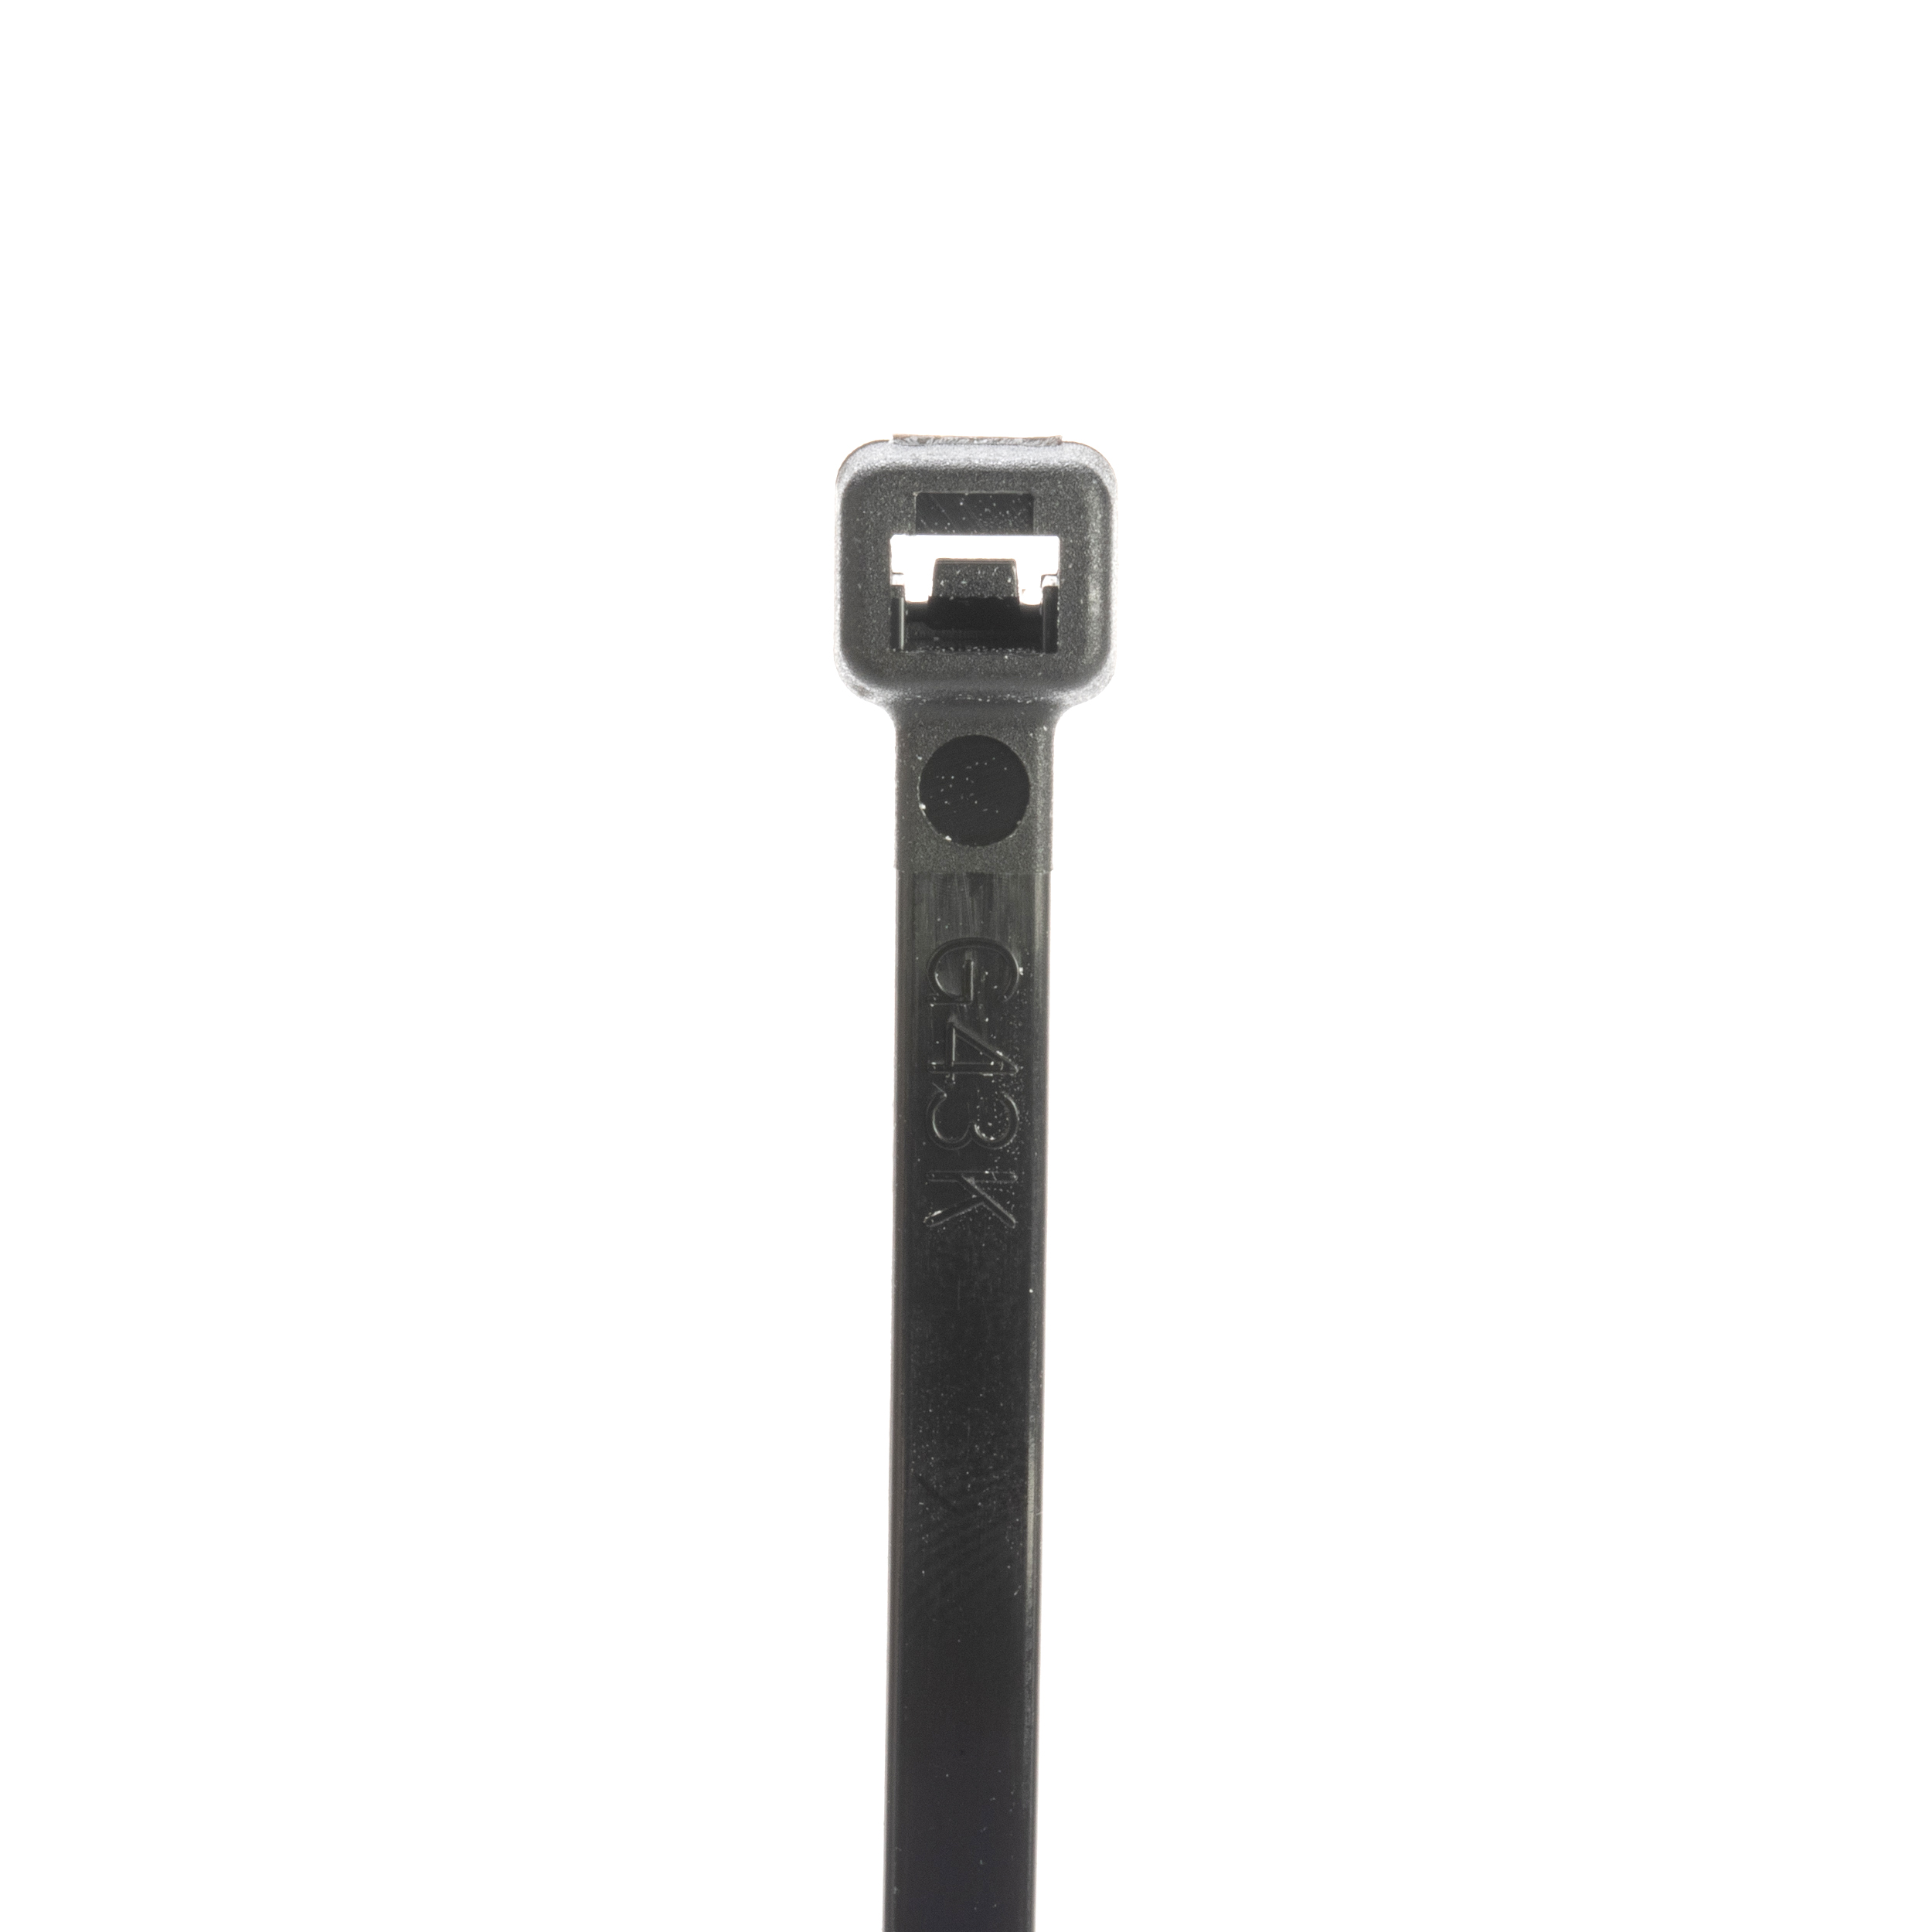 PAN S4-18-C0 3.94" CABLE TIE 18TS BLACK